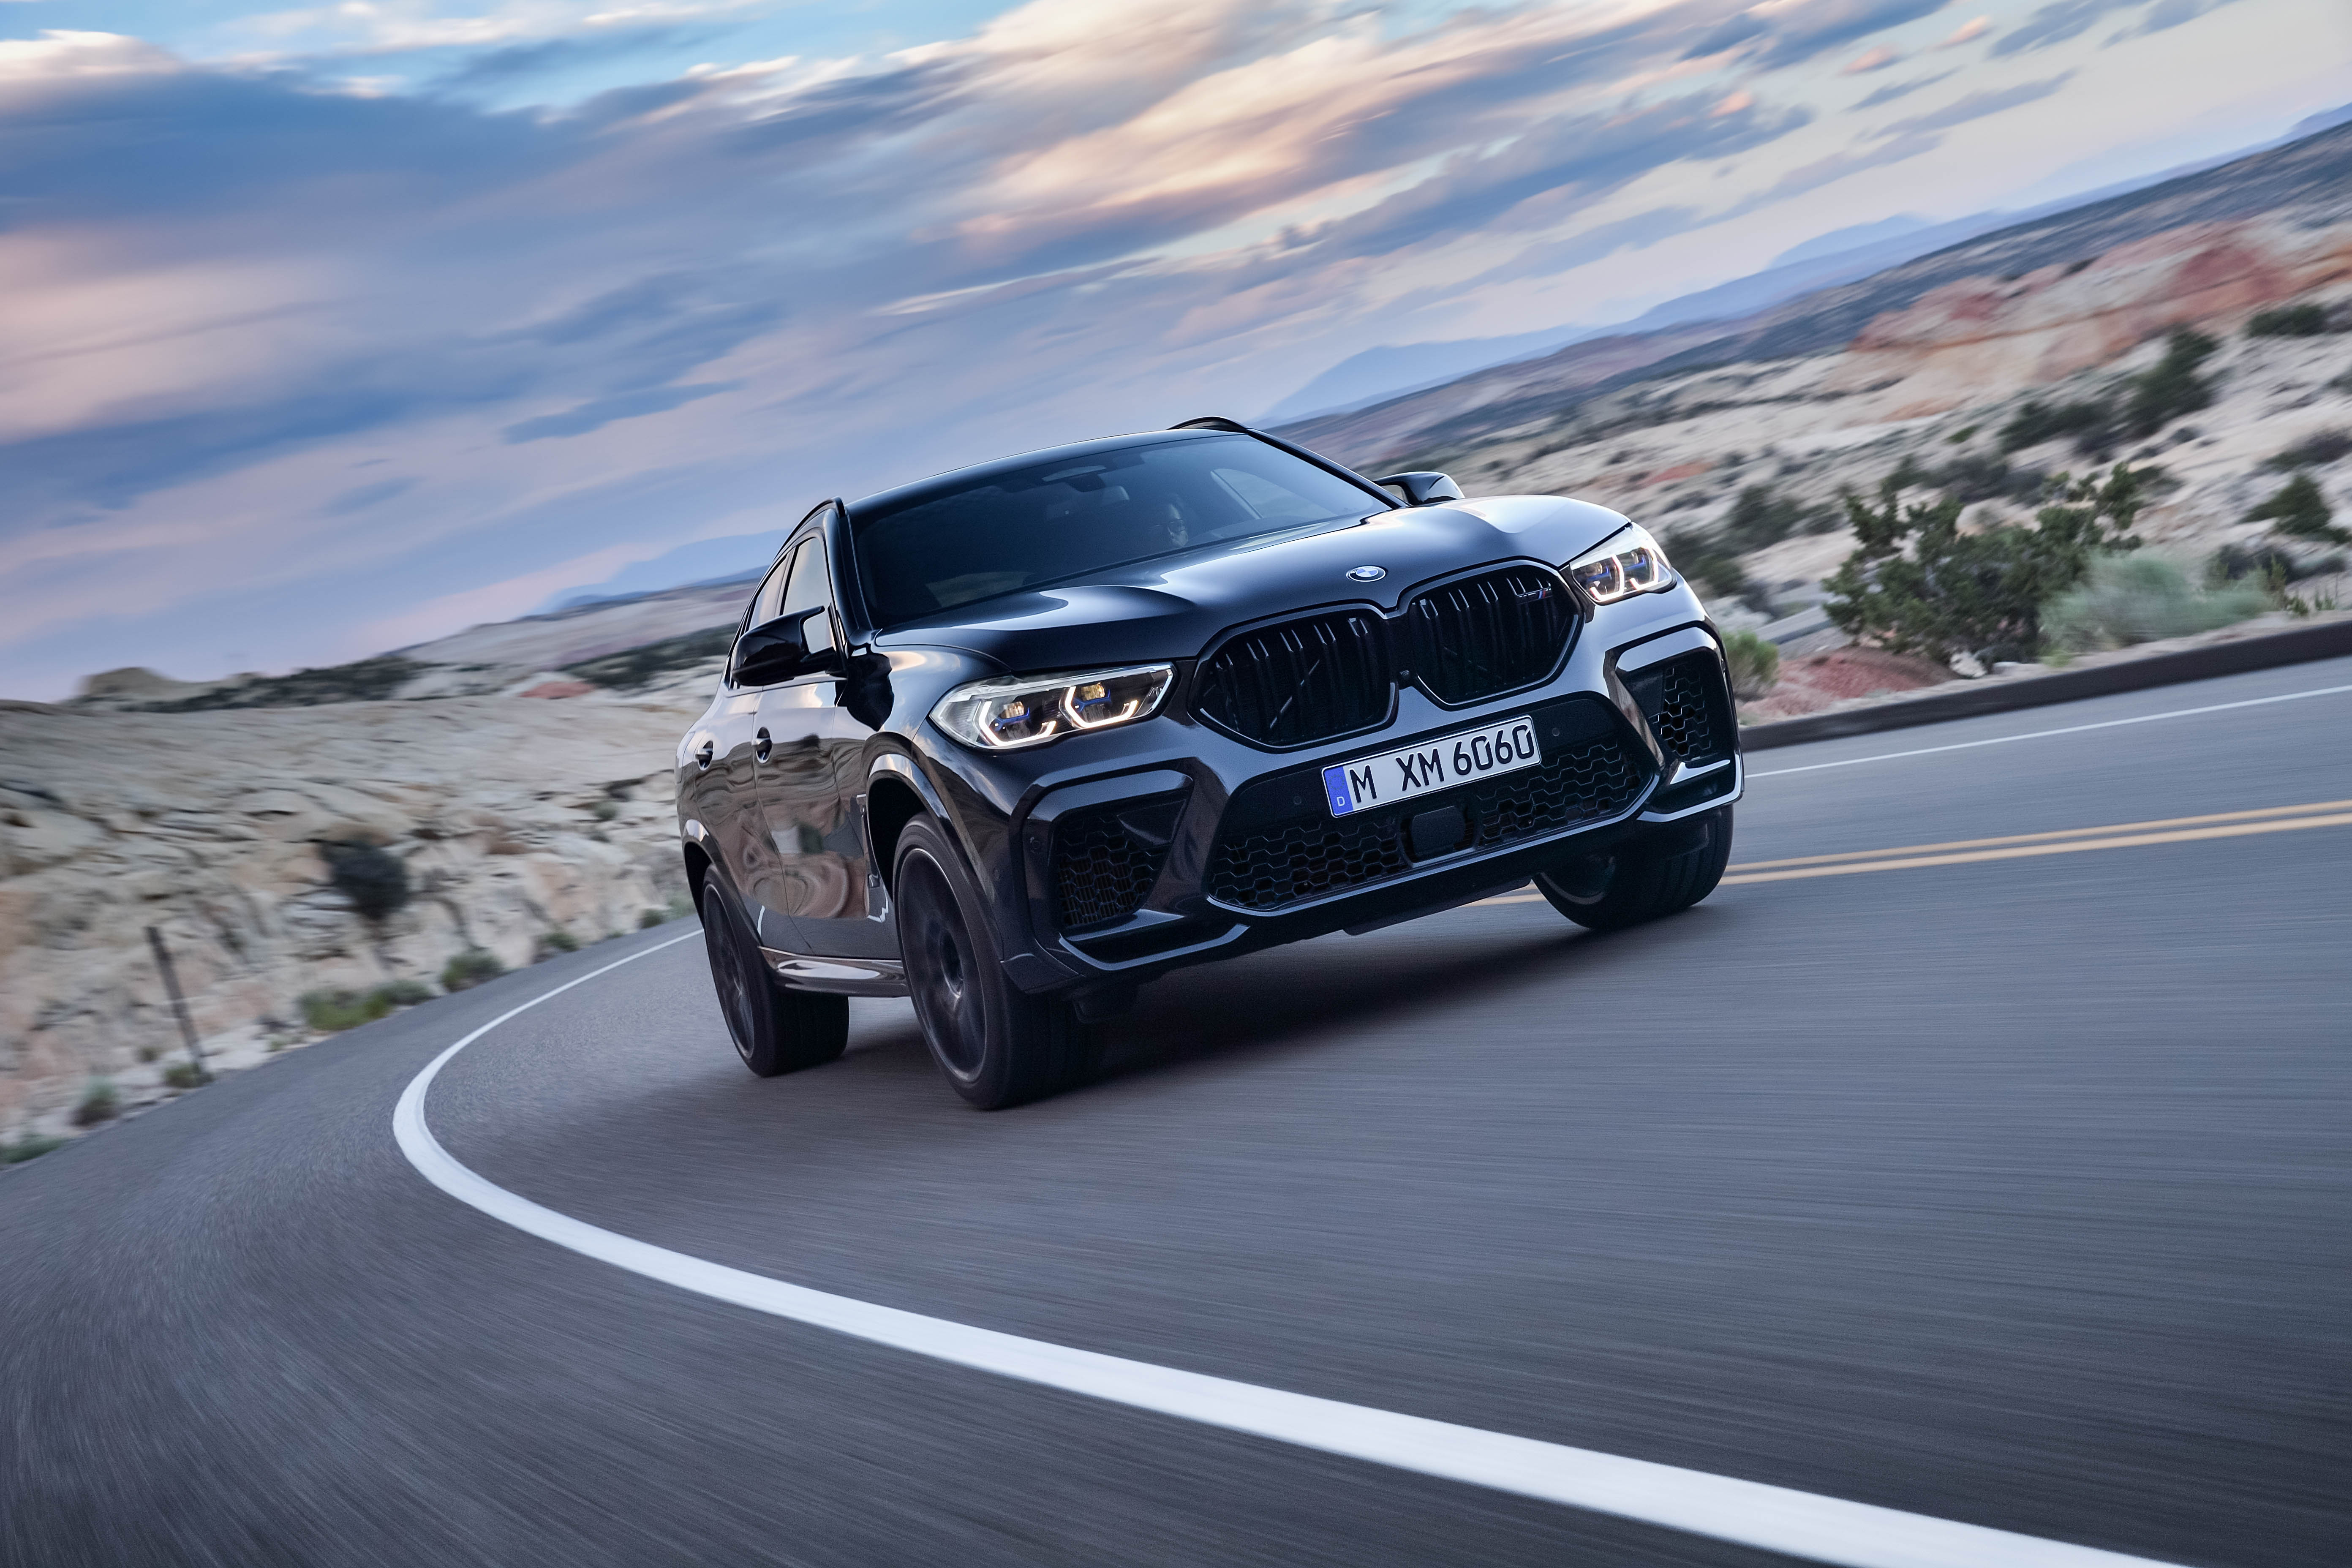 X6 competition. БМВ x6m Competition. BMW x6 m5. BMW x6 m Competition. БМВ x6m 2019.